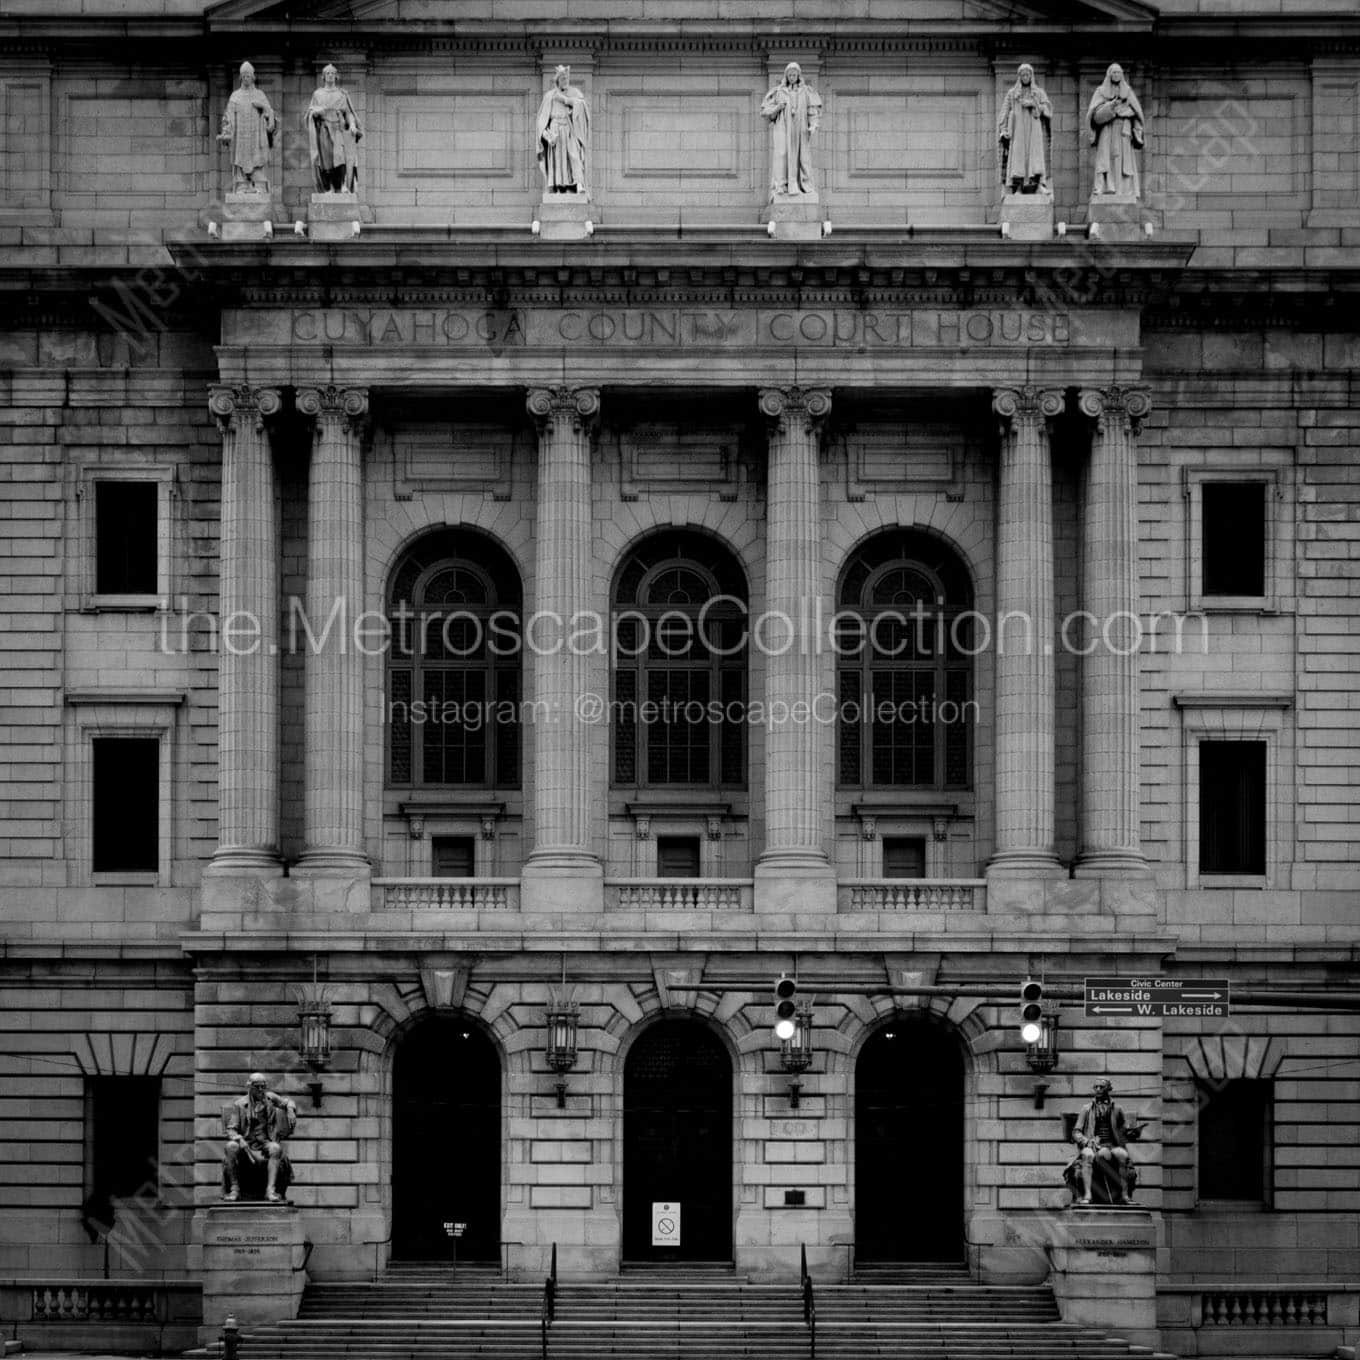 cuyahoga county court house Black & White Office Art